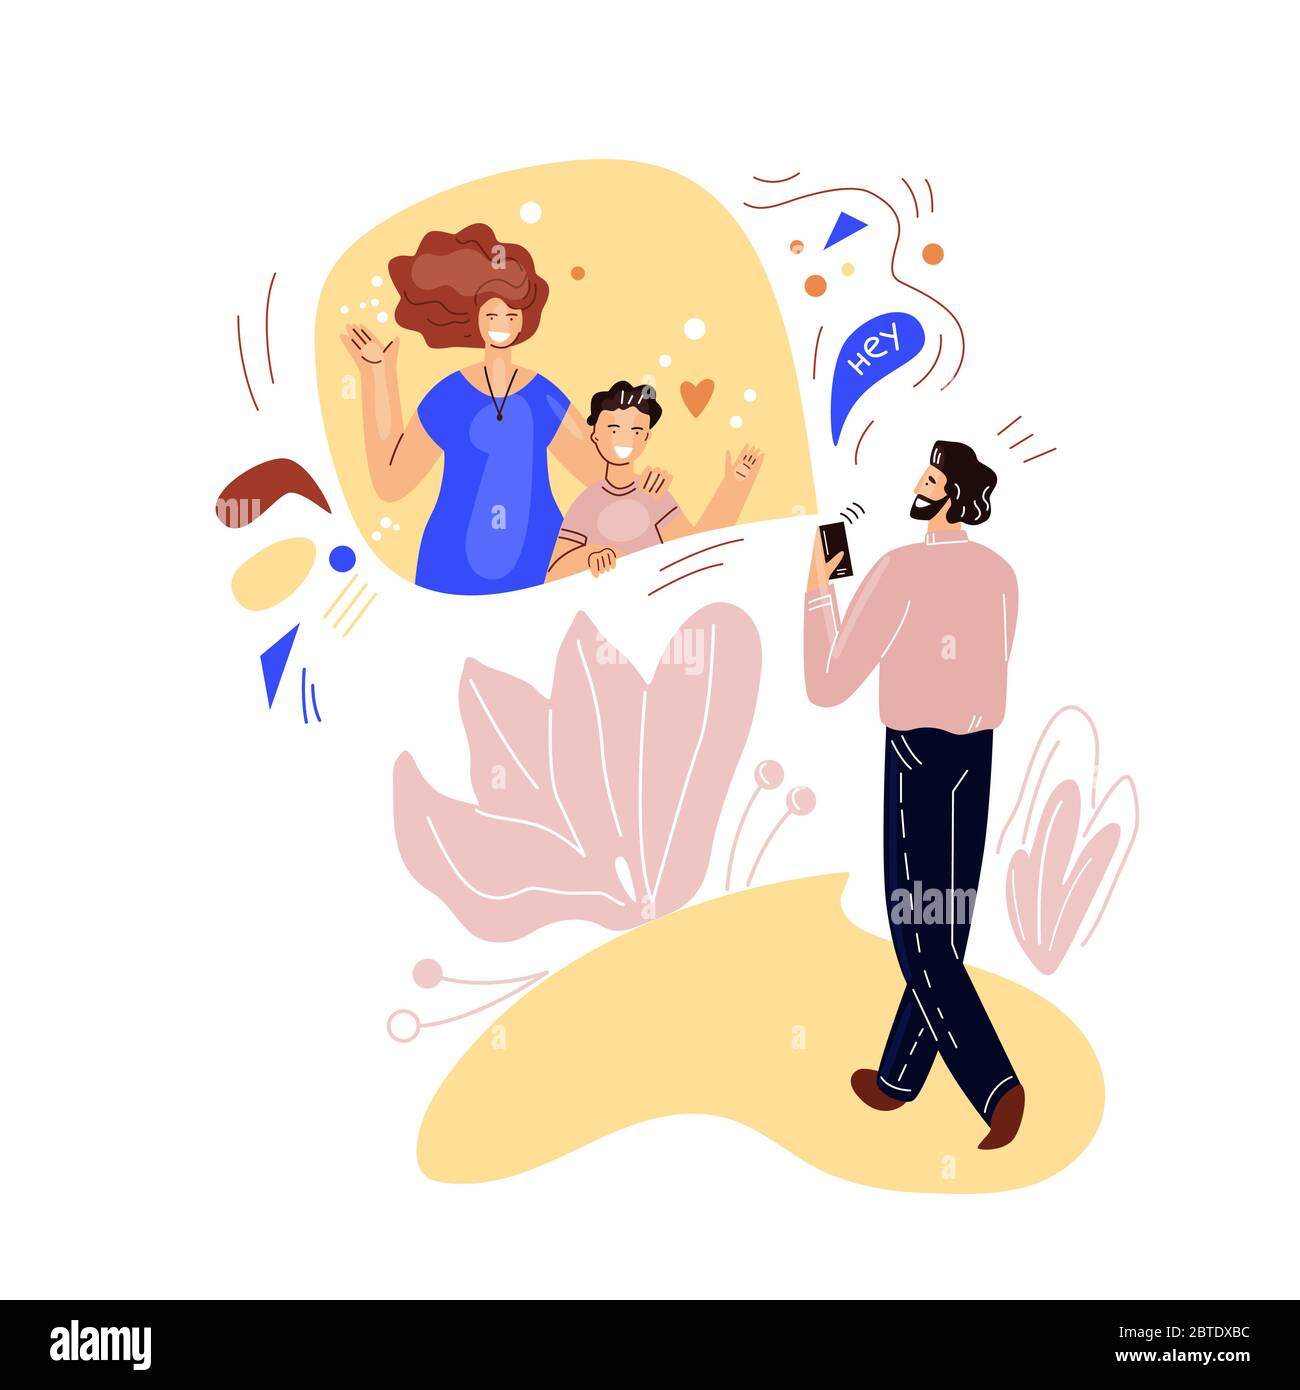 Man walking and talking on online video conference with family, wife and kid. Vector flat concept of online communication and virtual meeting Stock Vector